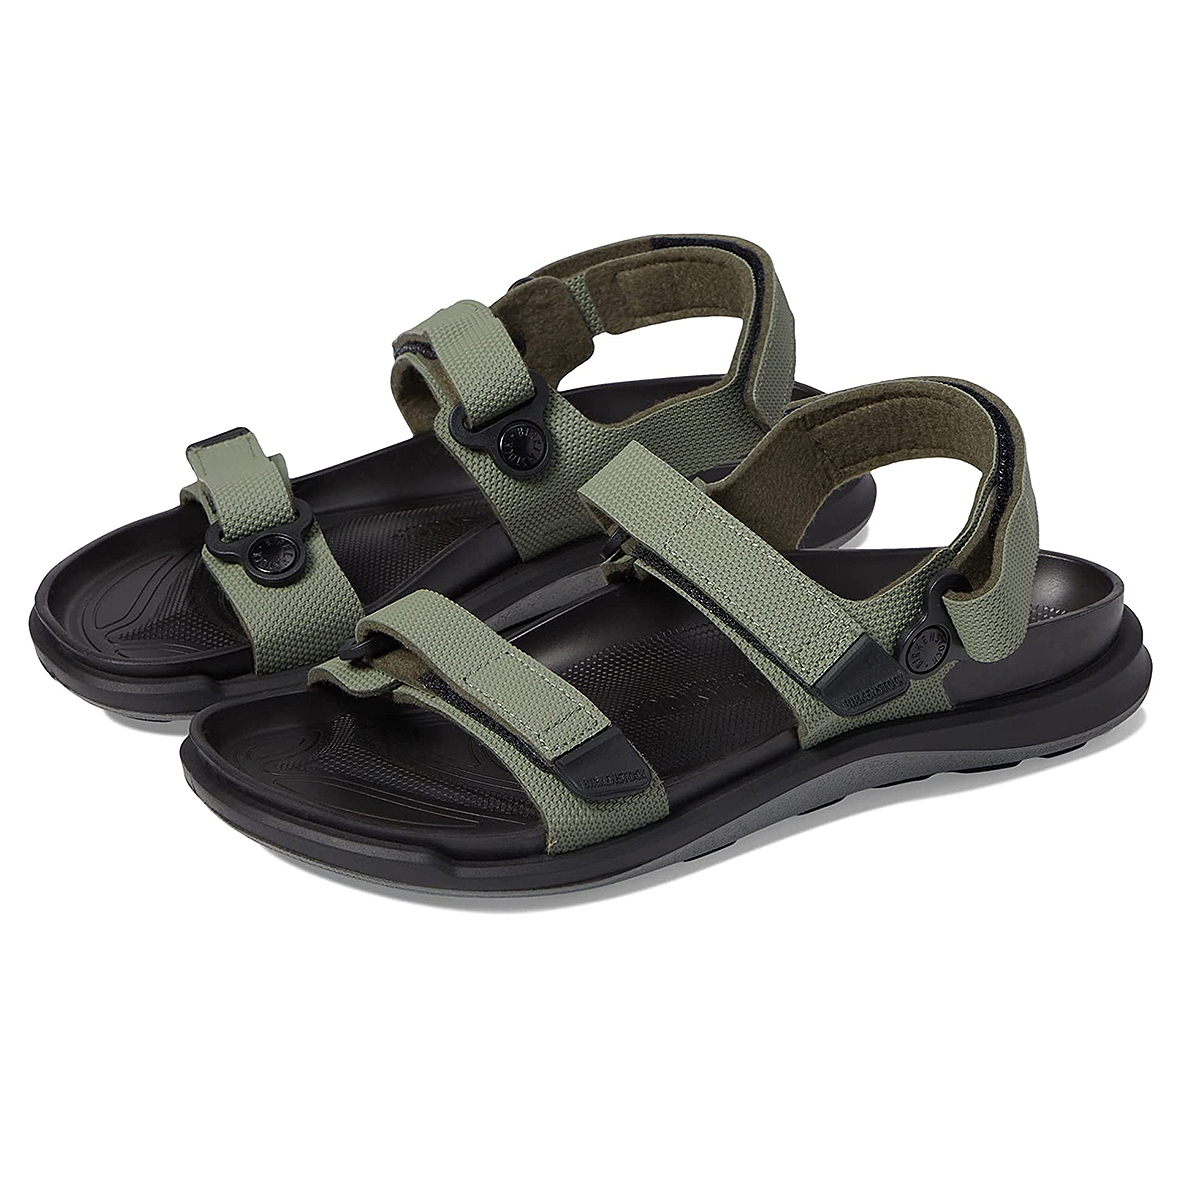 Best Birkenstocks for Back Pain and Achy Feet | UsWeekly